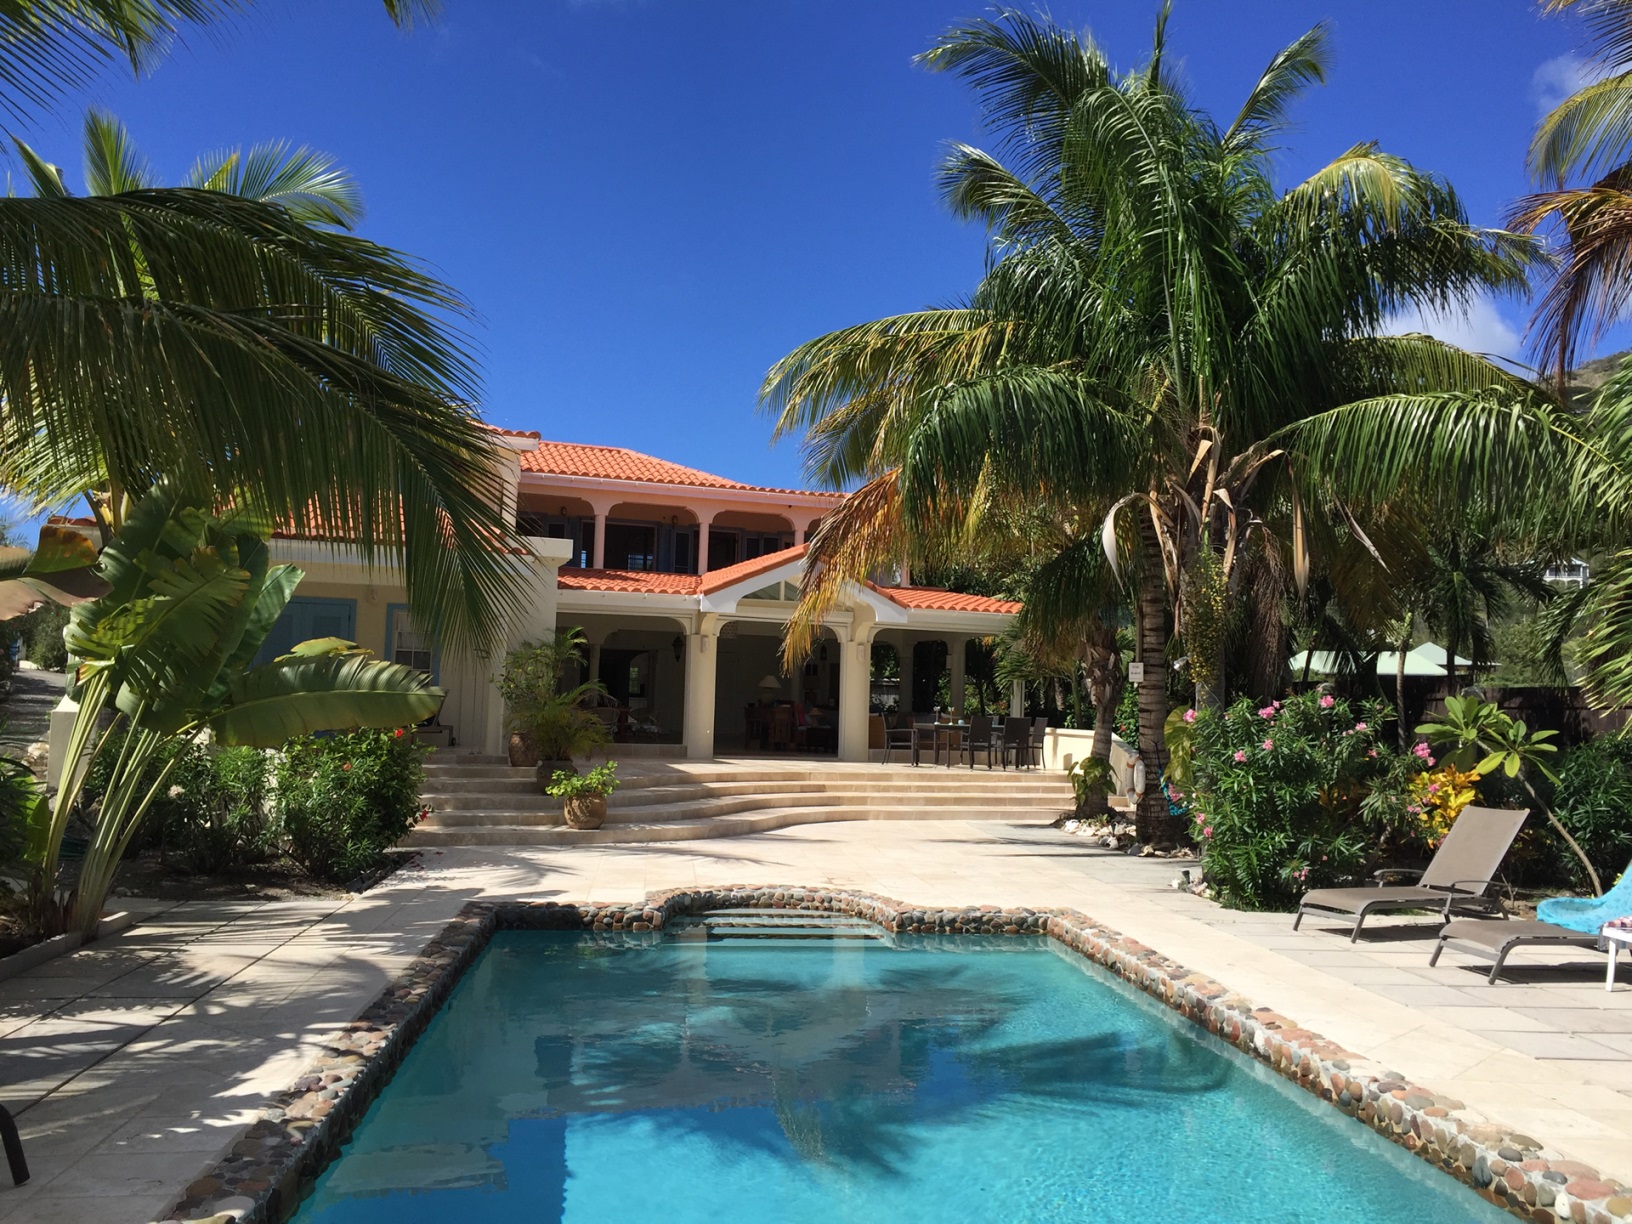 The pool at Deep Bay House in Antigua